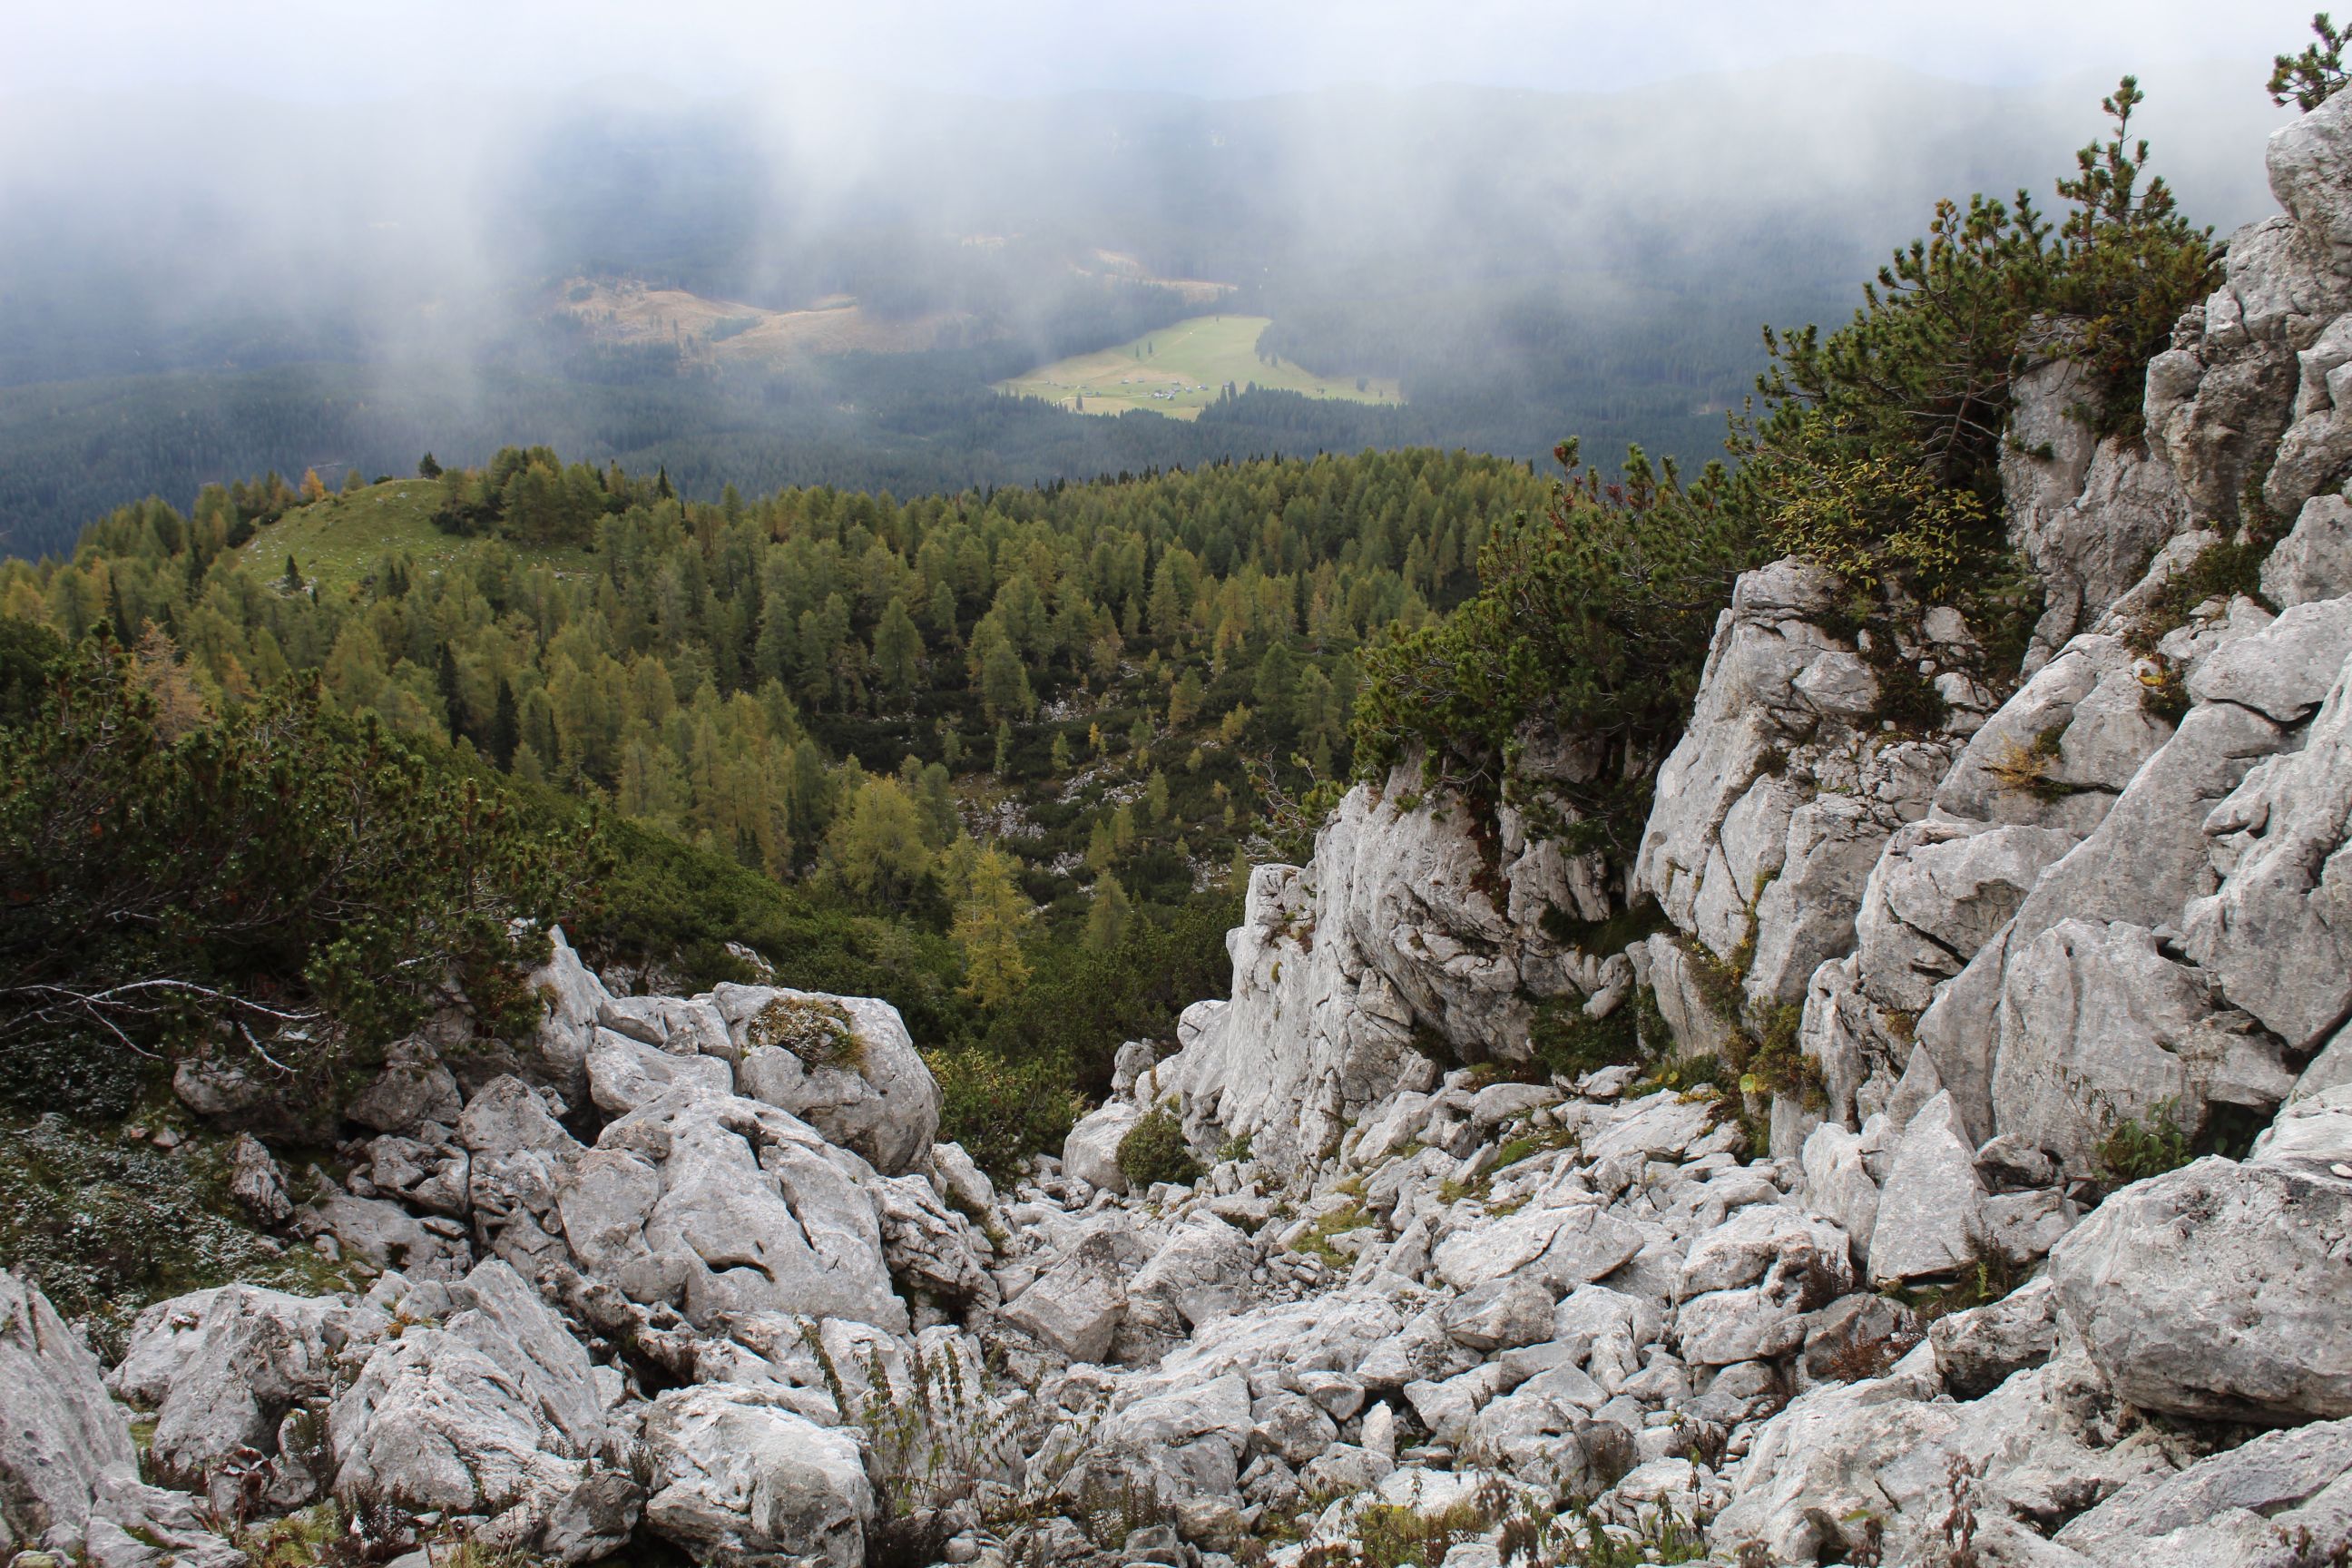 A view of the forest, looking down from the rocky Julian Alps in Slovenia.